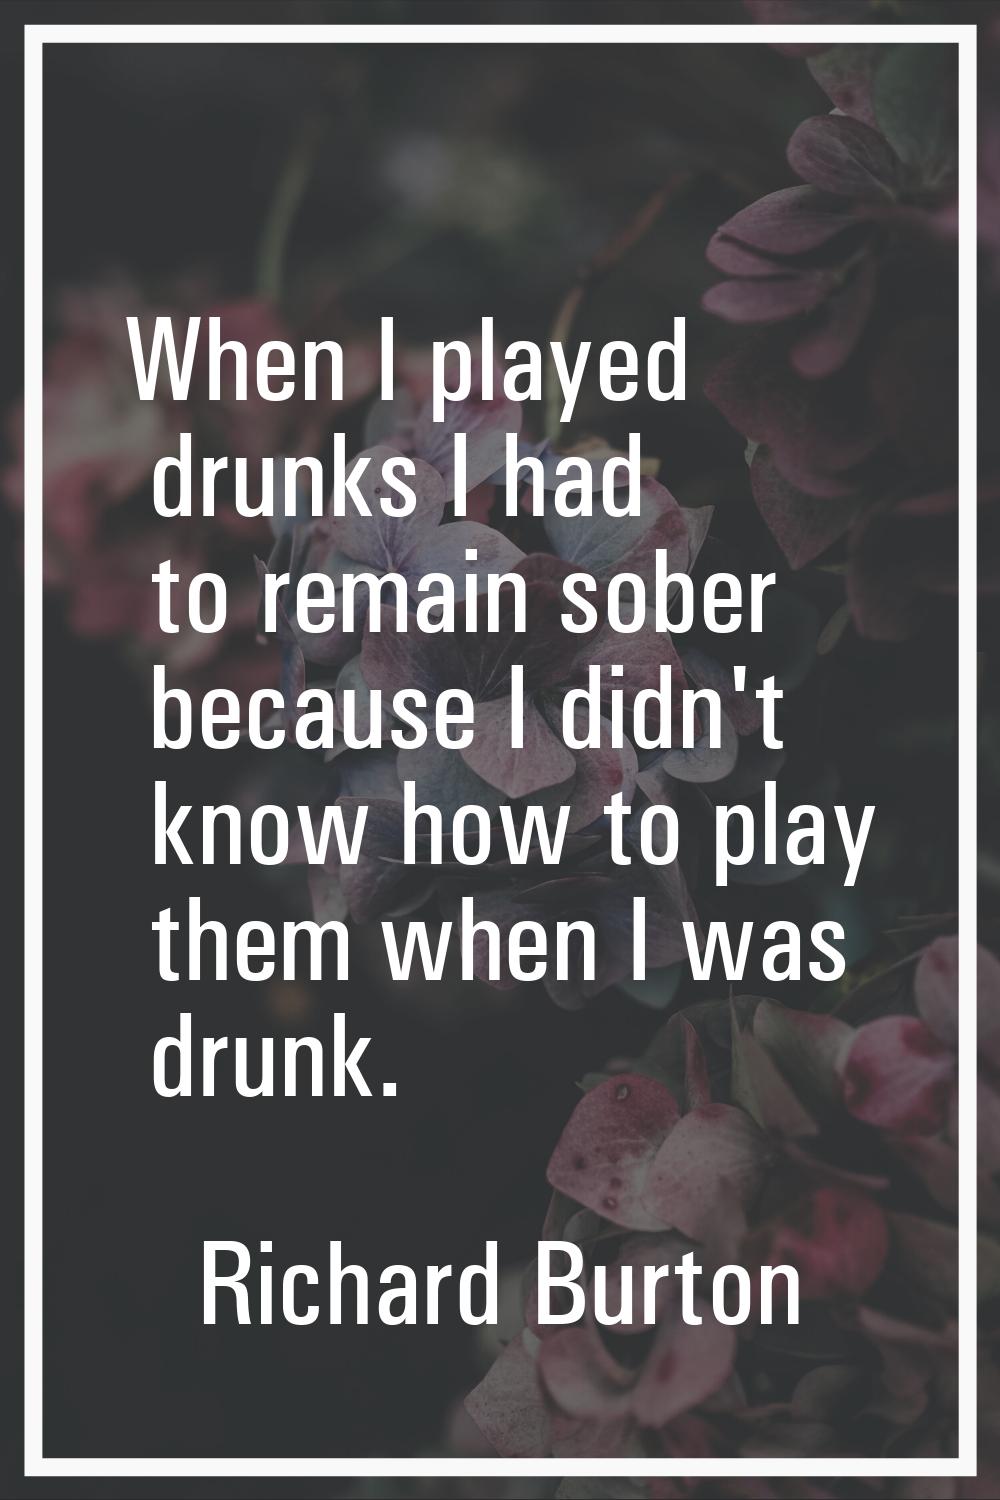 When I played drunks I had to remain sober because I didn't know how to play them when I was drunk.